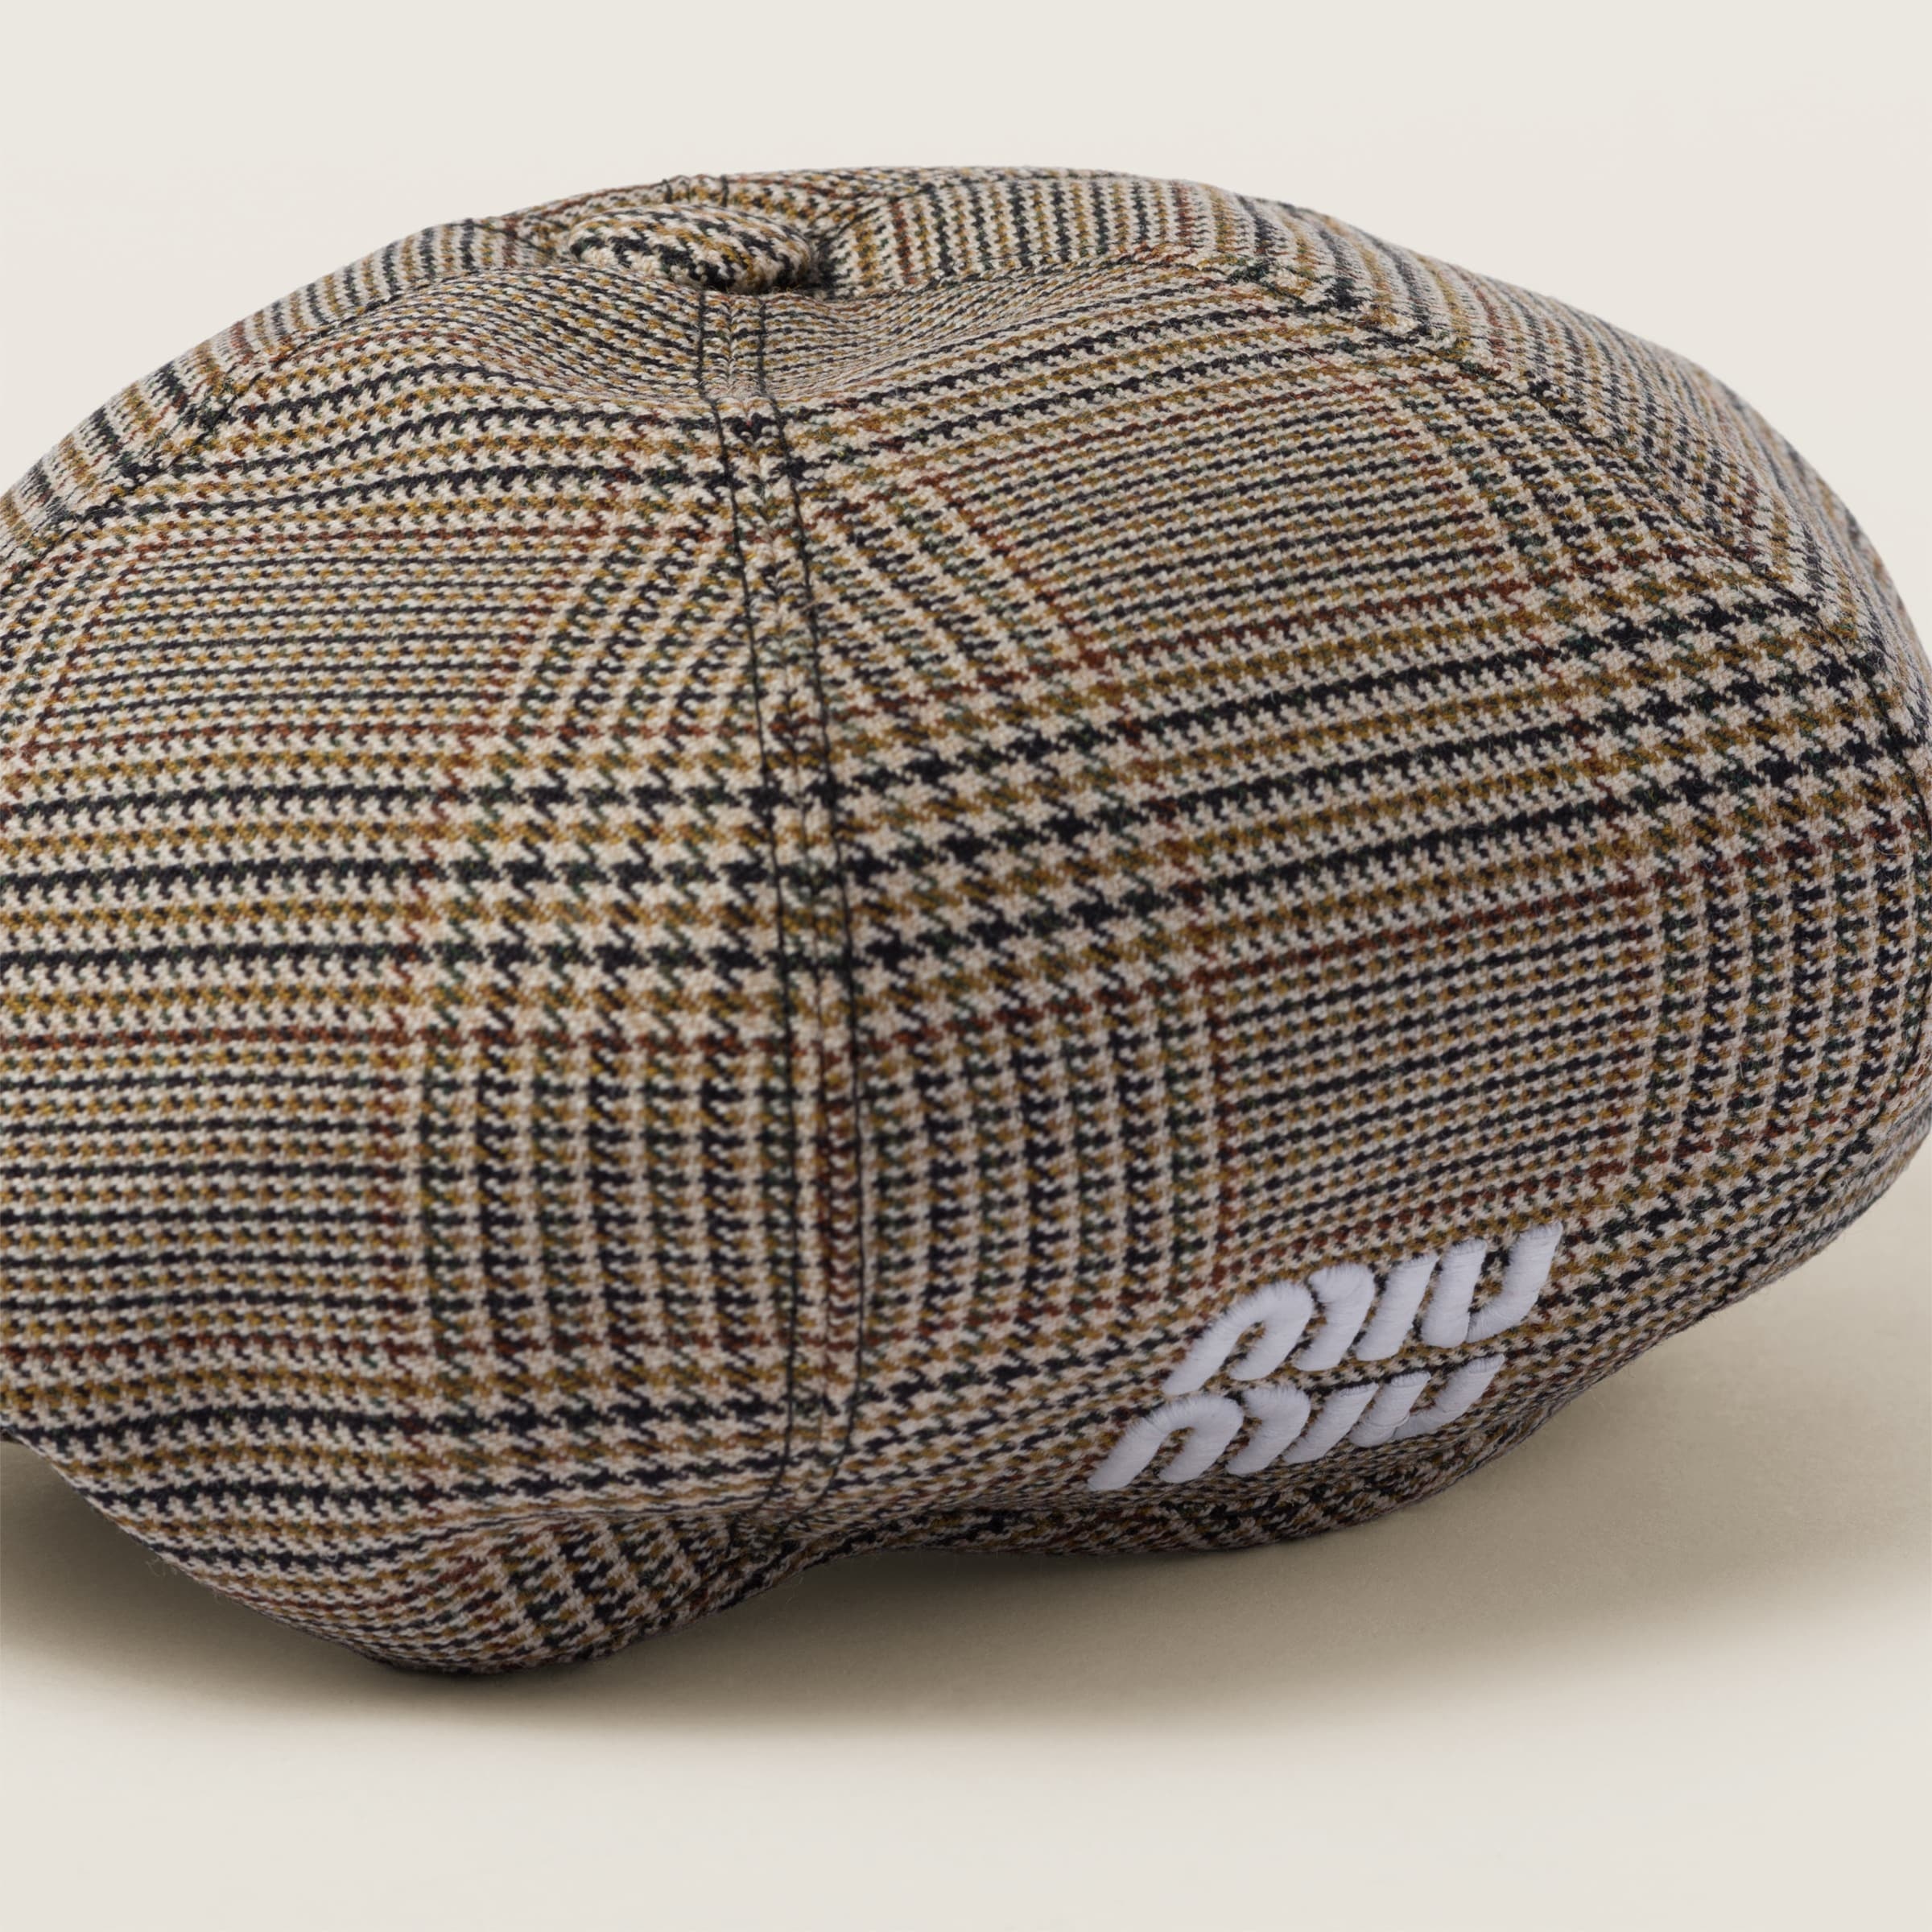 Prince of Wales checked wool hat - 3